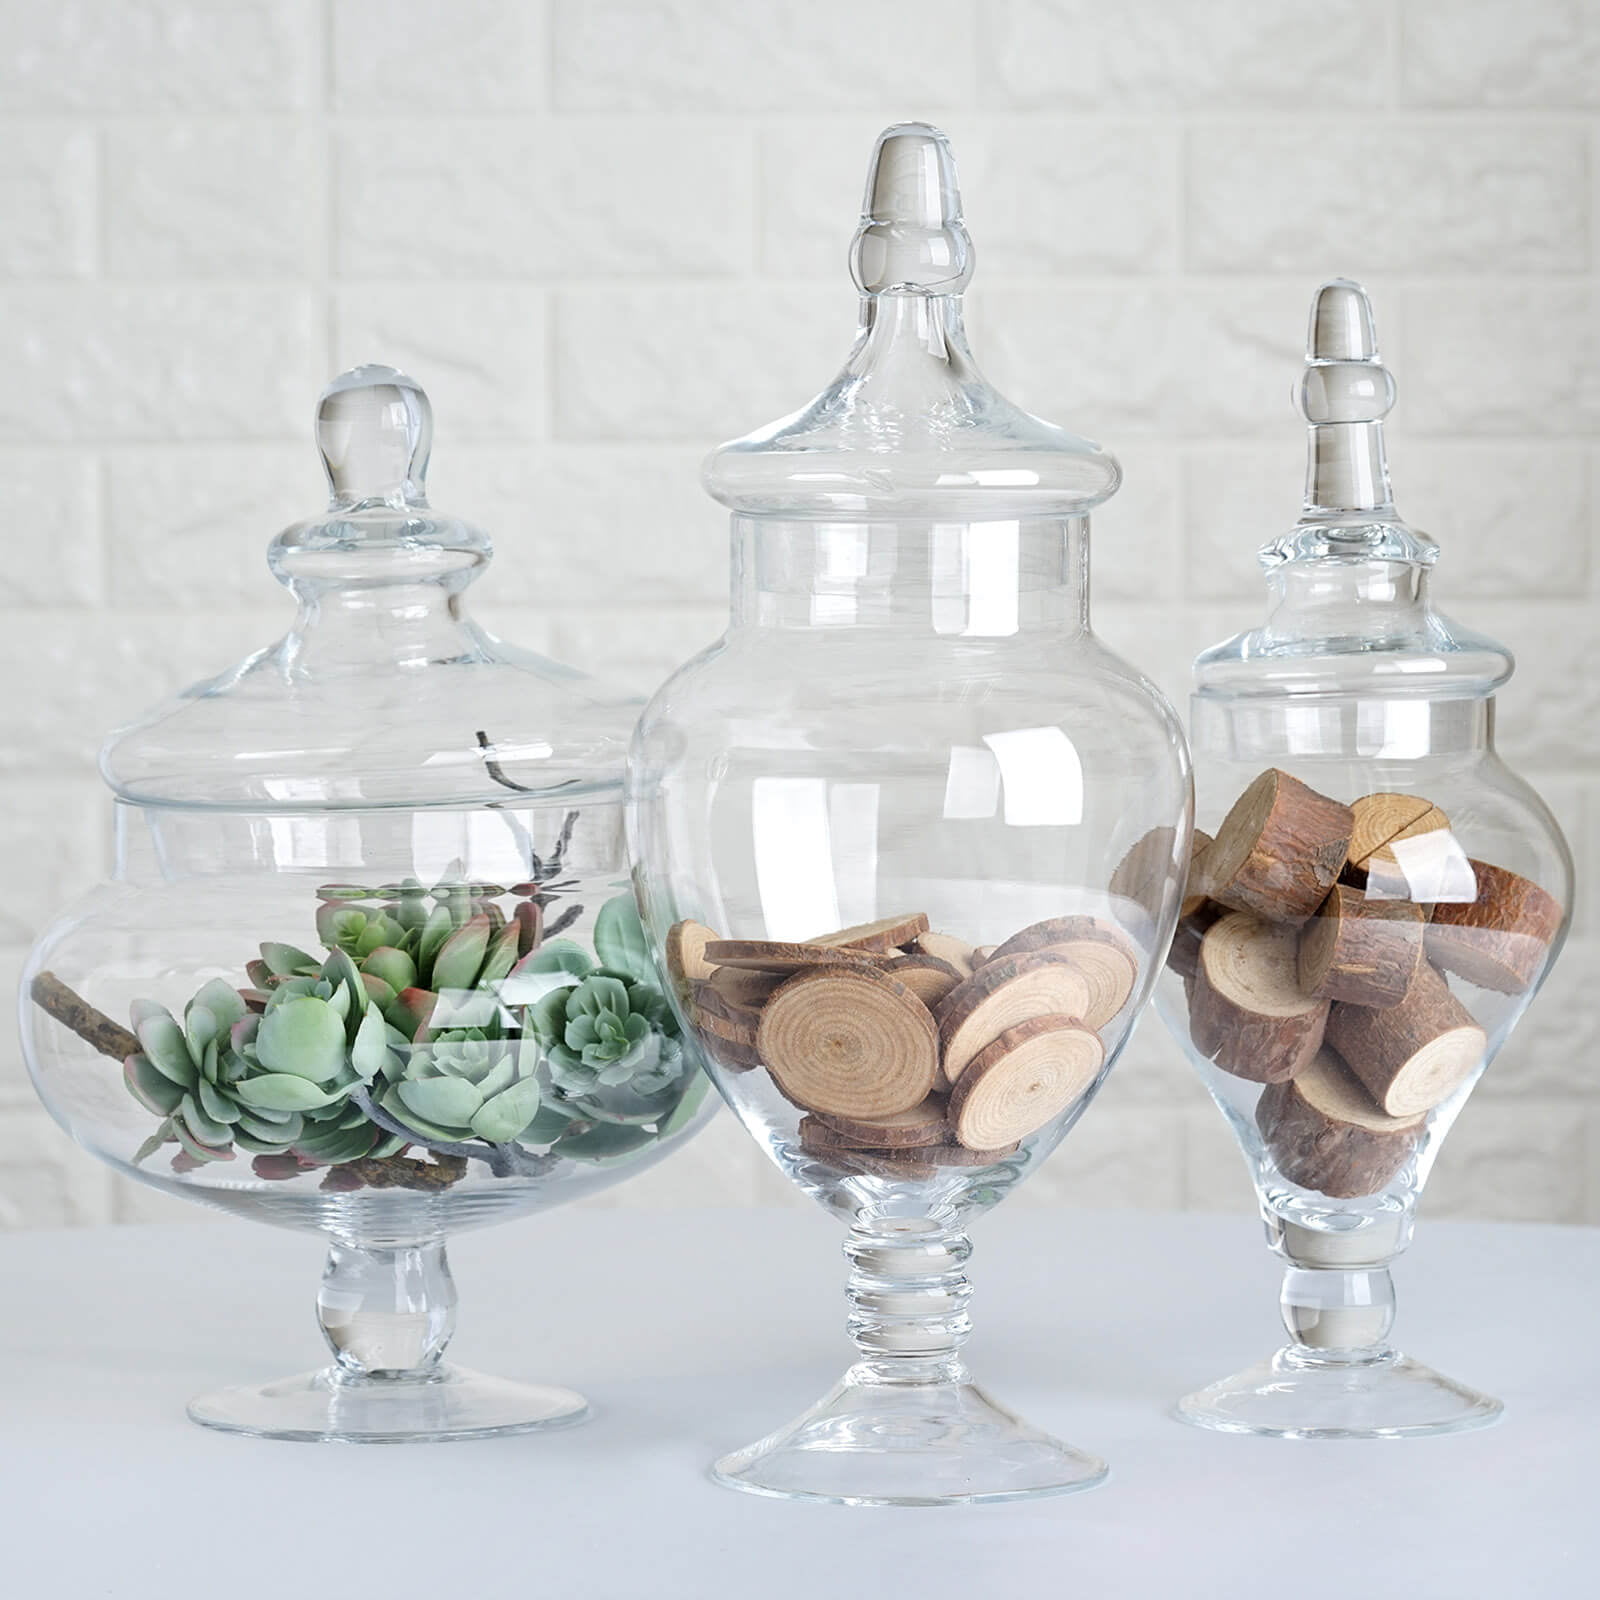 Decorative Glass Storage Container with Lid - Food Candy Display Jar Large  - Etched Painted Leaves Decor for Bathroom Kitchen - 11.4 in (29 cm)